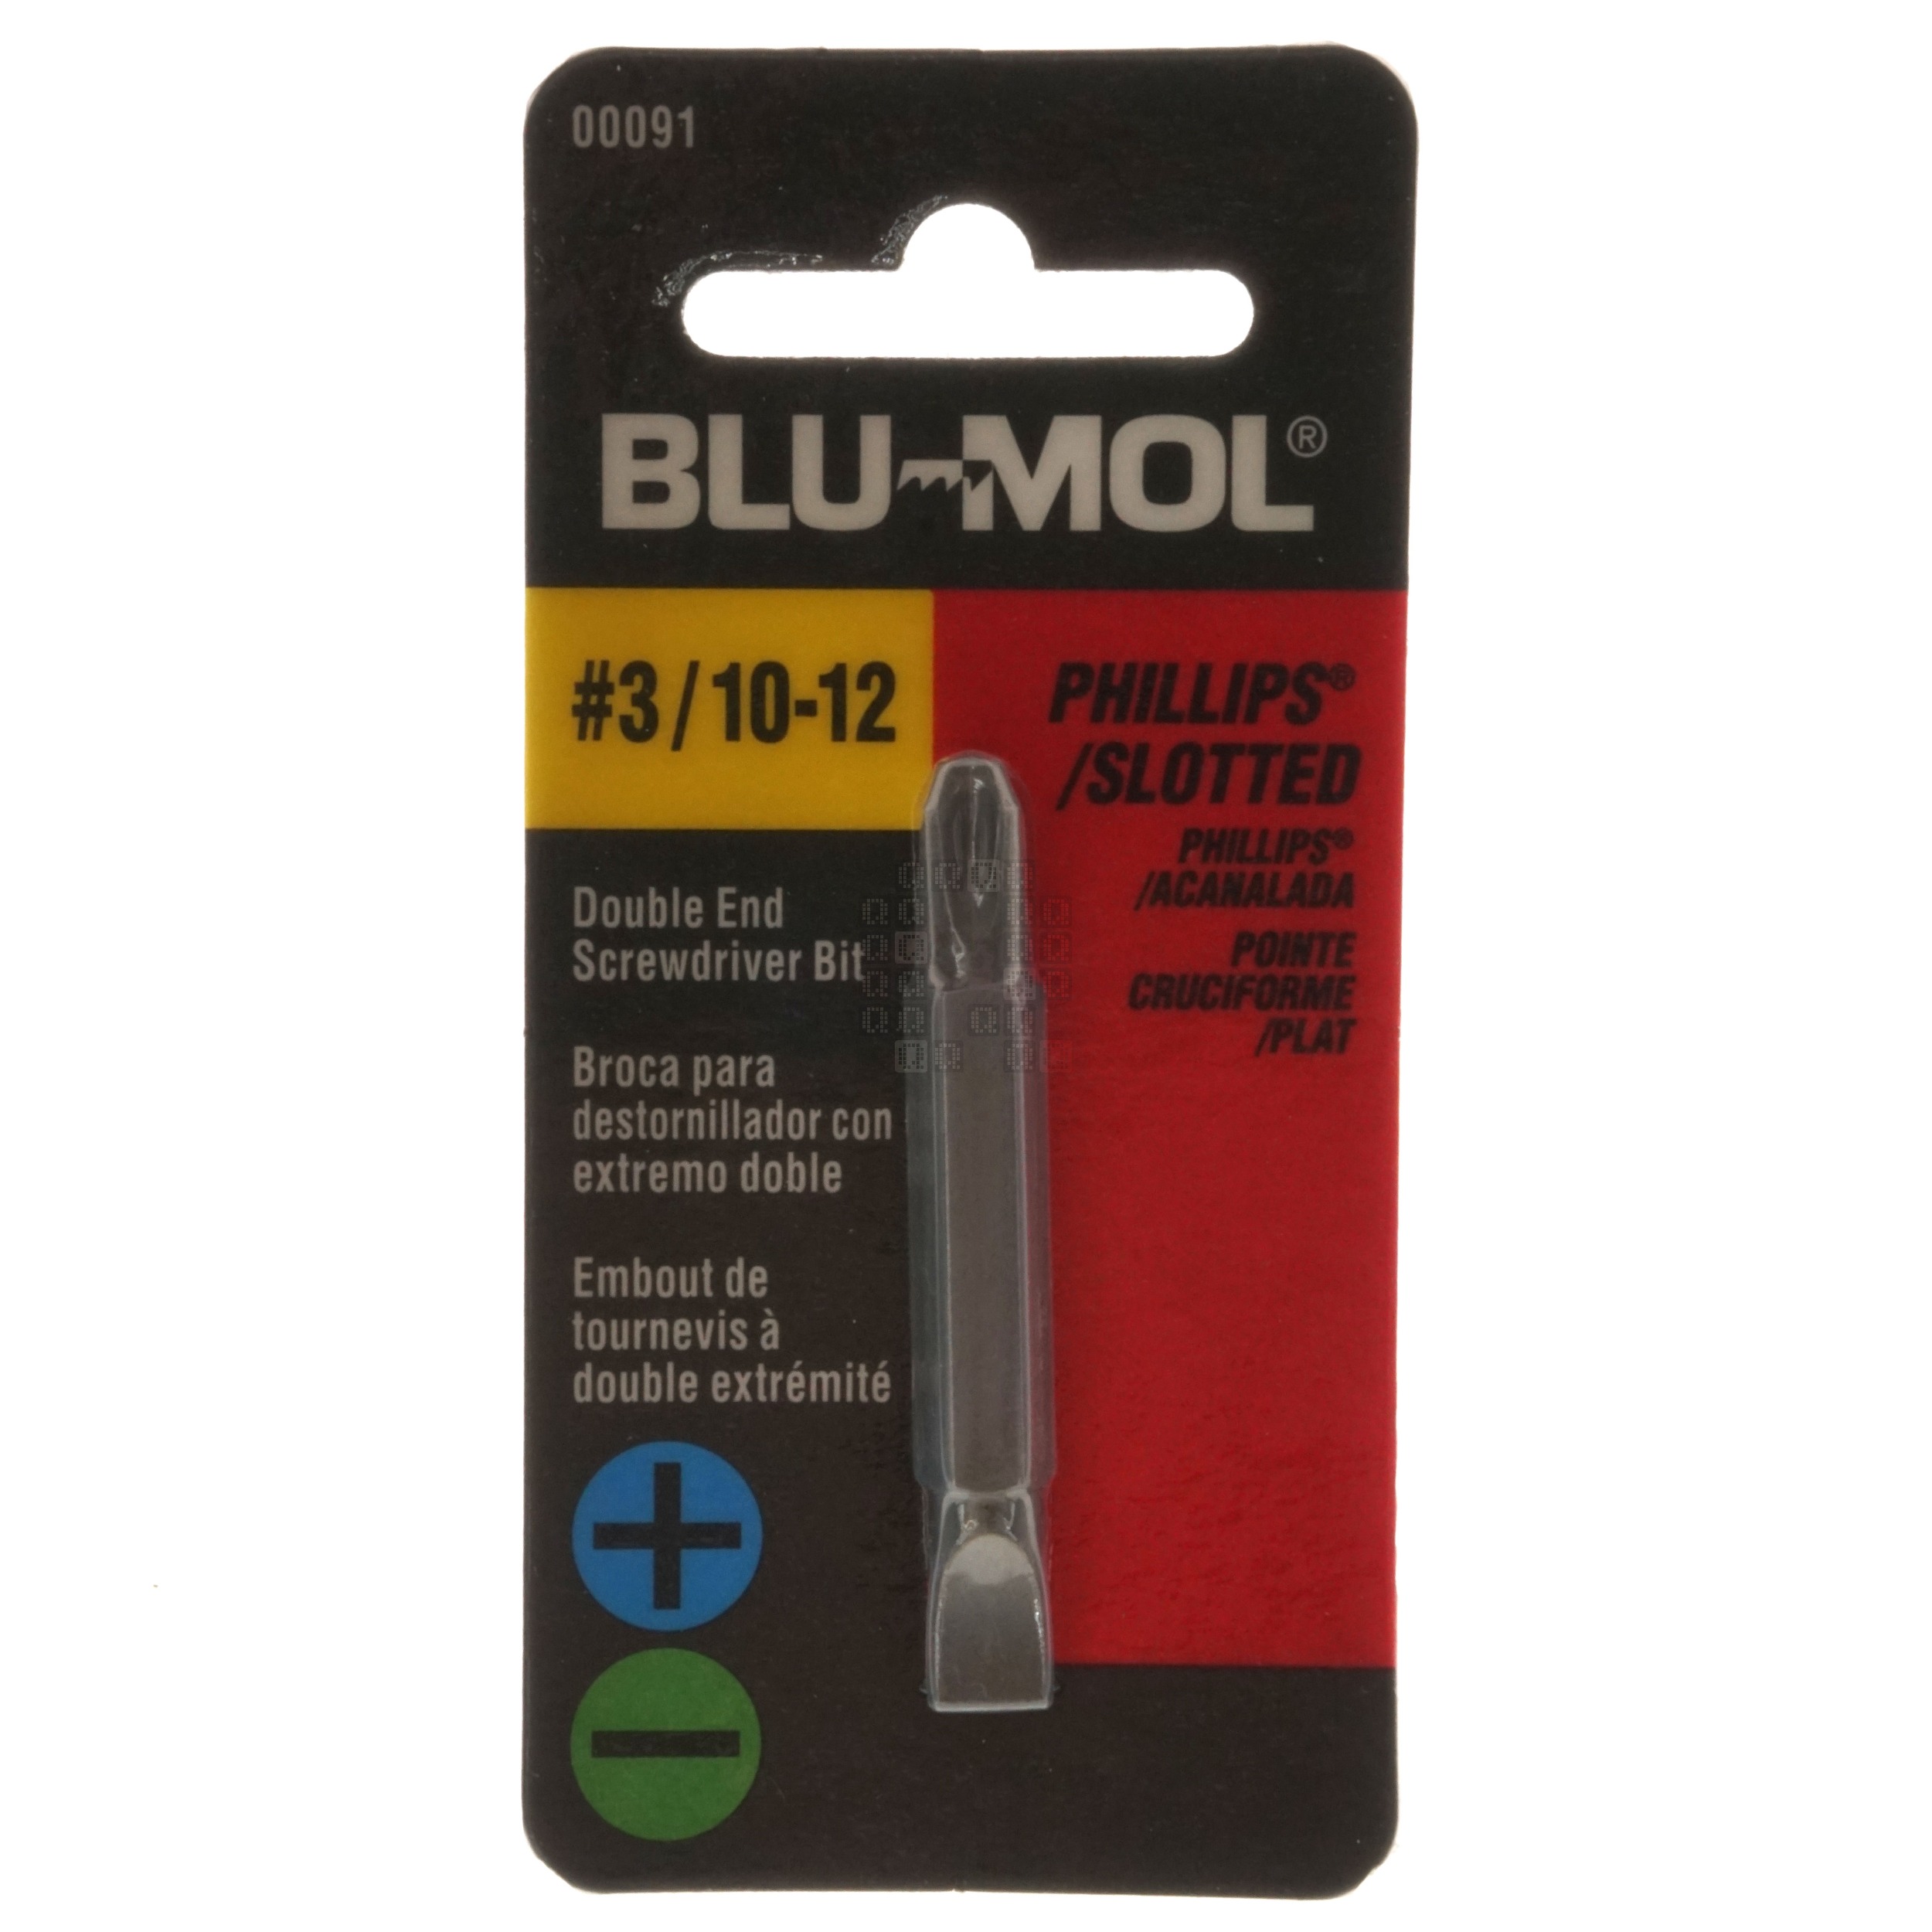 BLU-MOL 00091 #3 Phillips / 10-12 Slotted Double End Screwdriver Bit, 2" Length